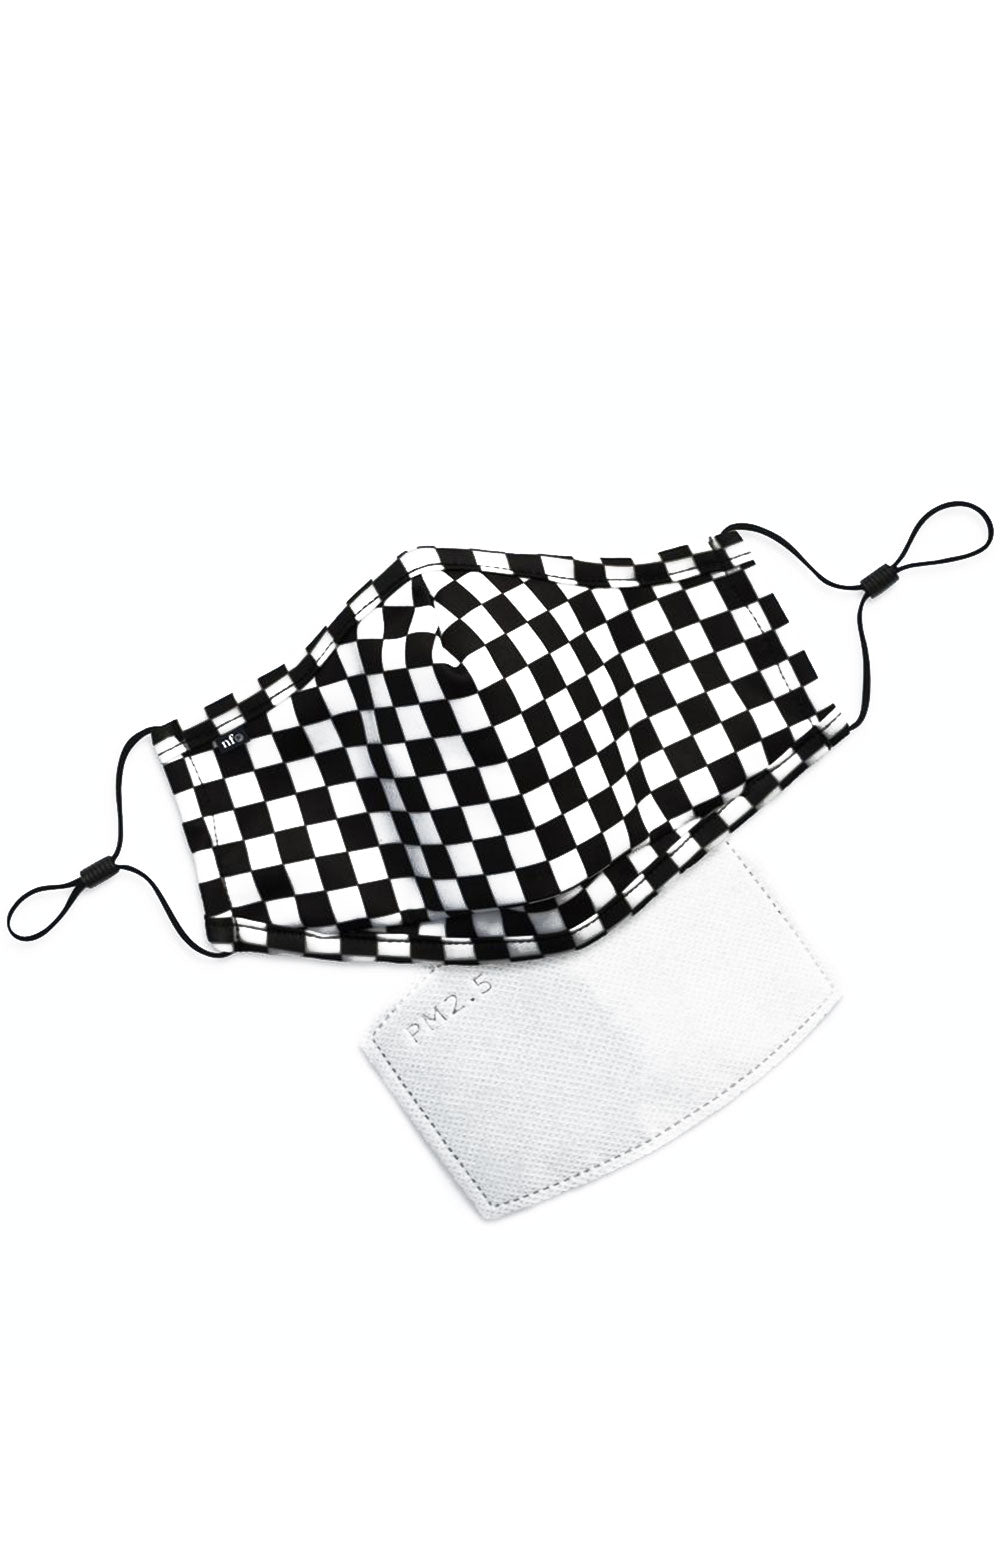 Adult Anti Bacterial Knit Face Mask - Black Checkerboard